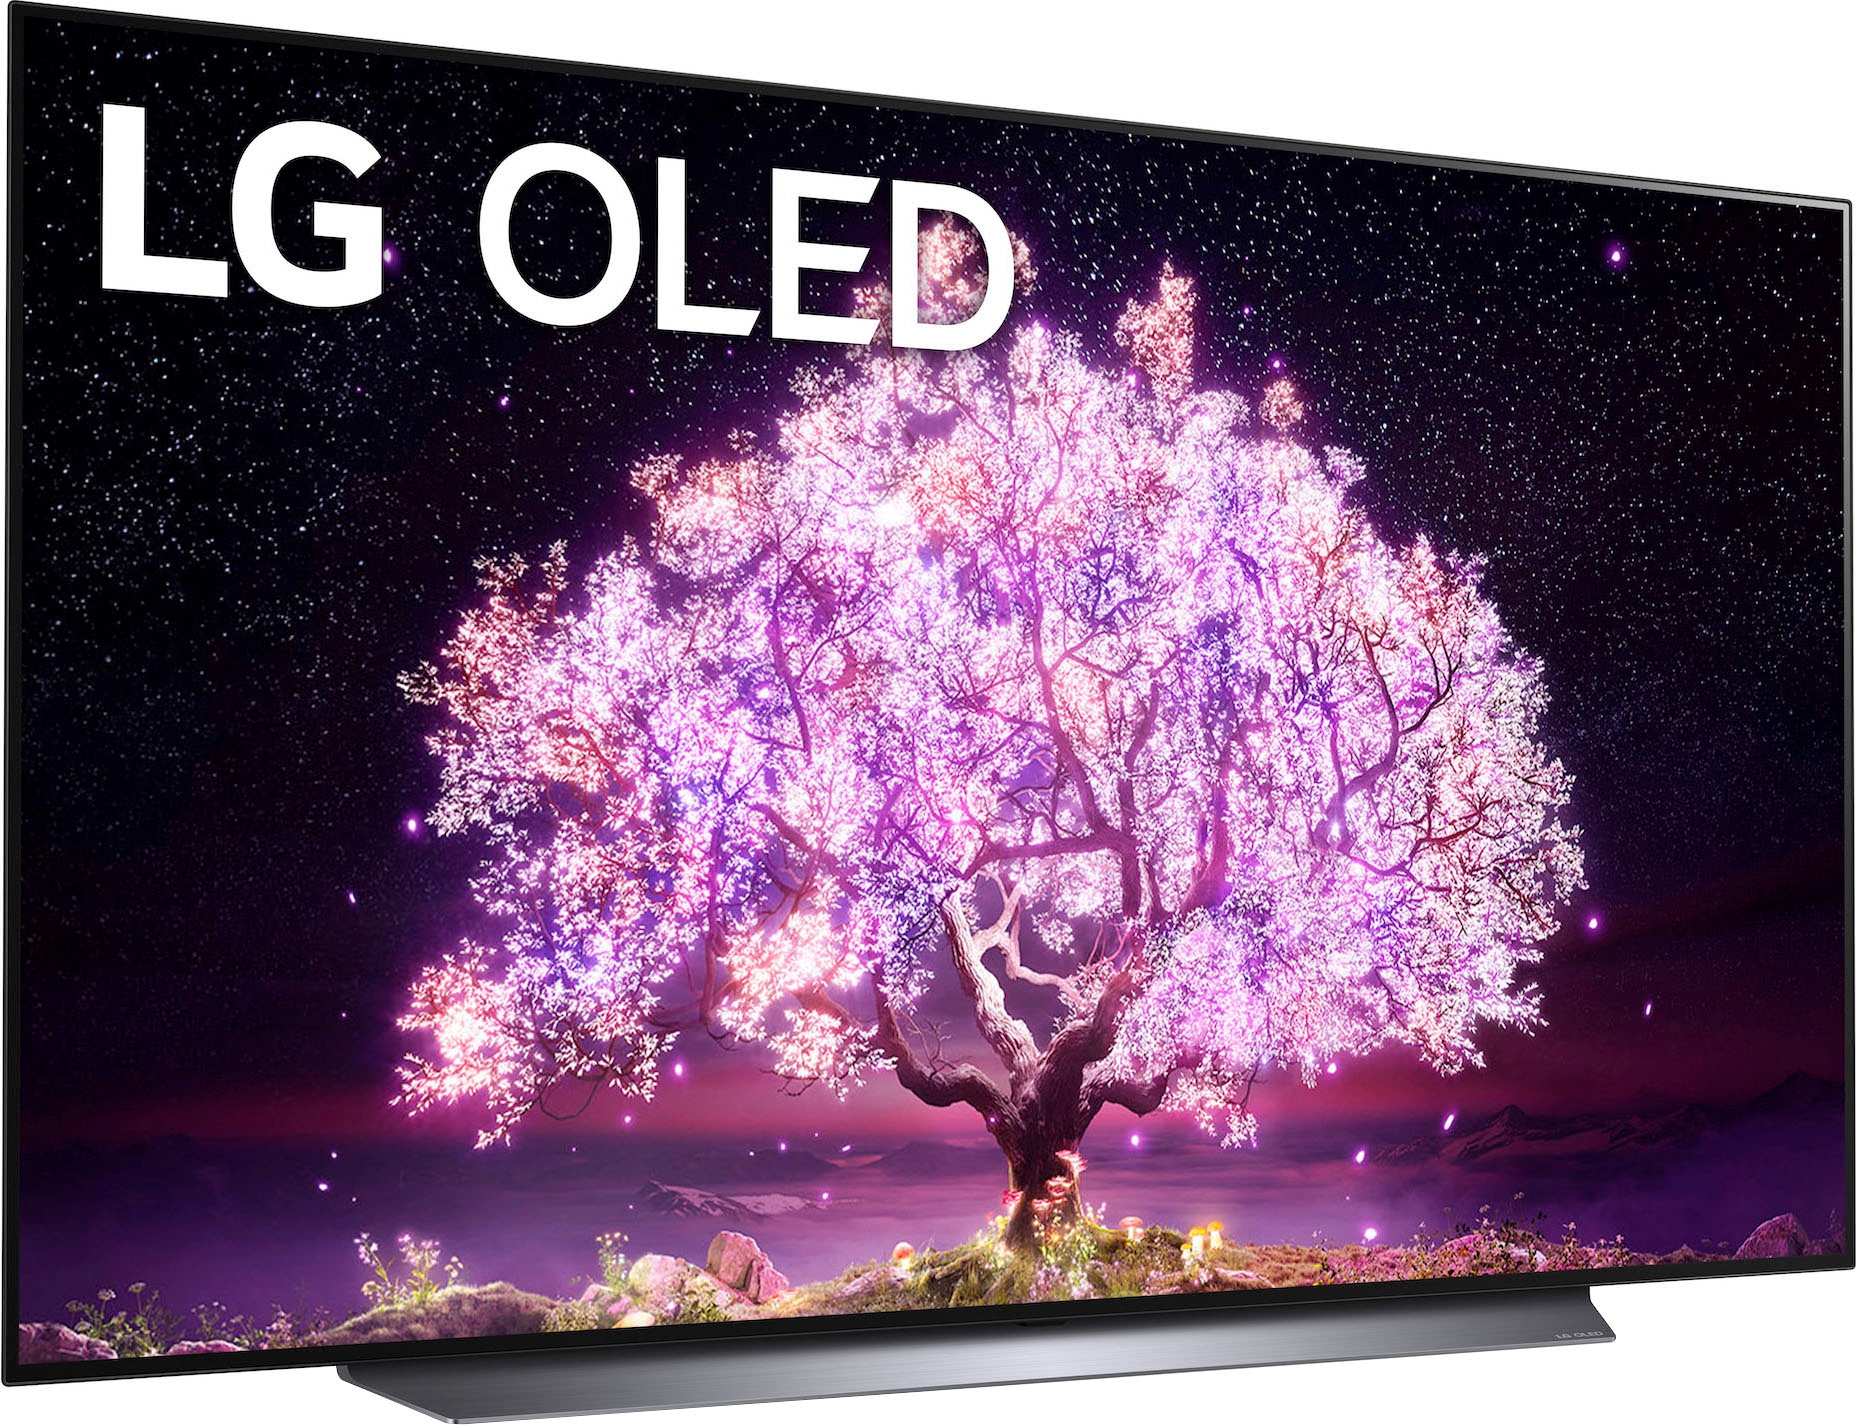 AI-Prozessor,Dolby Gen4 Zoll, & 4K Smart-TV, Ultra Vision OLED LG »OLED77C17LB«, bei Dolby 4K HD, cm/77 OTTO OLED-Fernseher 195 ,α9 Atmos kaufen jetzt